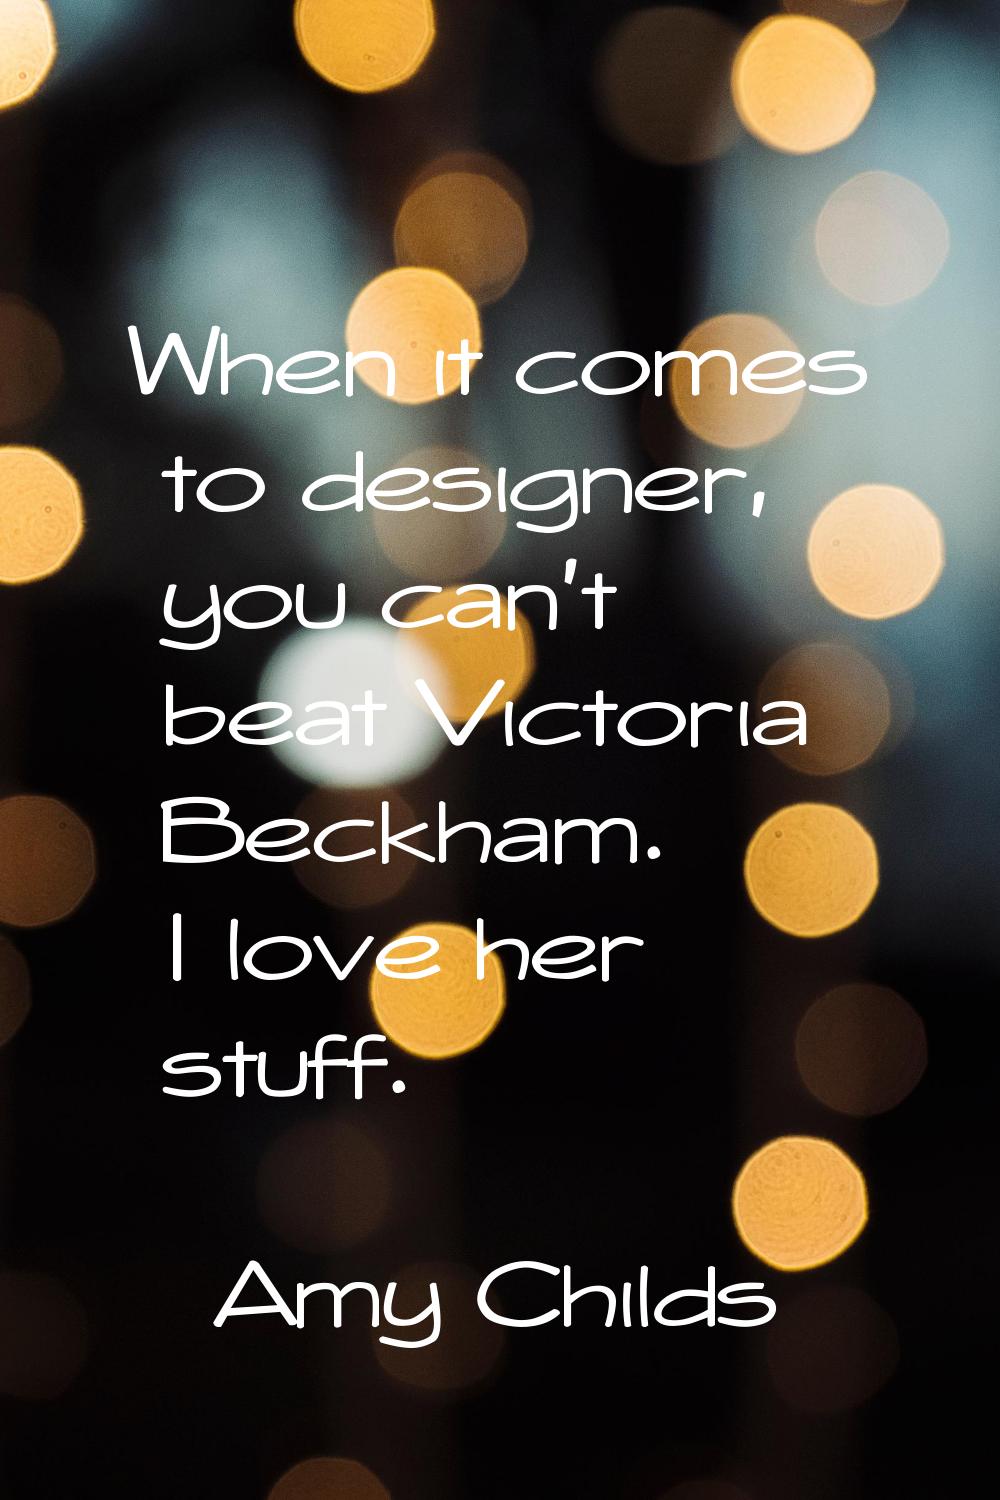 When it comes to designer, you can't beat Victoria Beckham. I love her stuff.